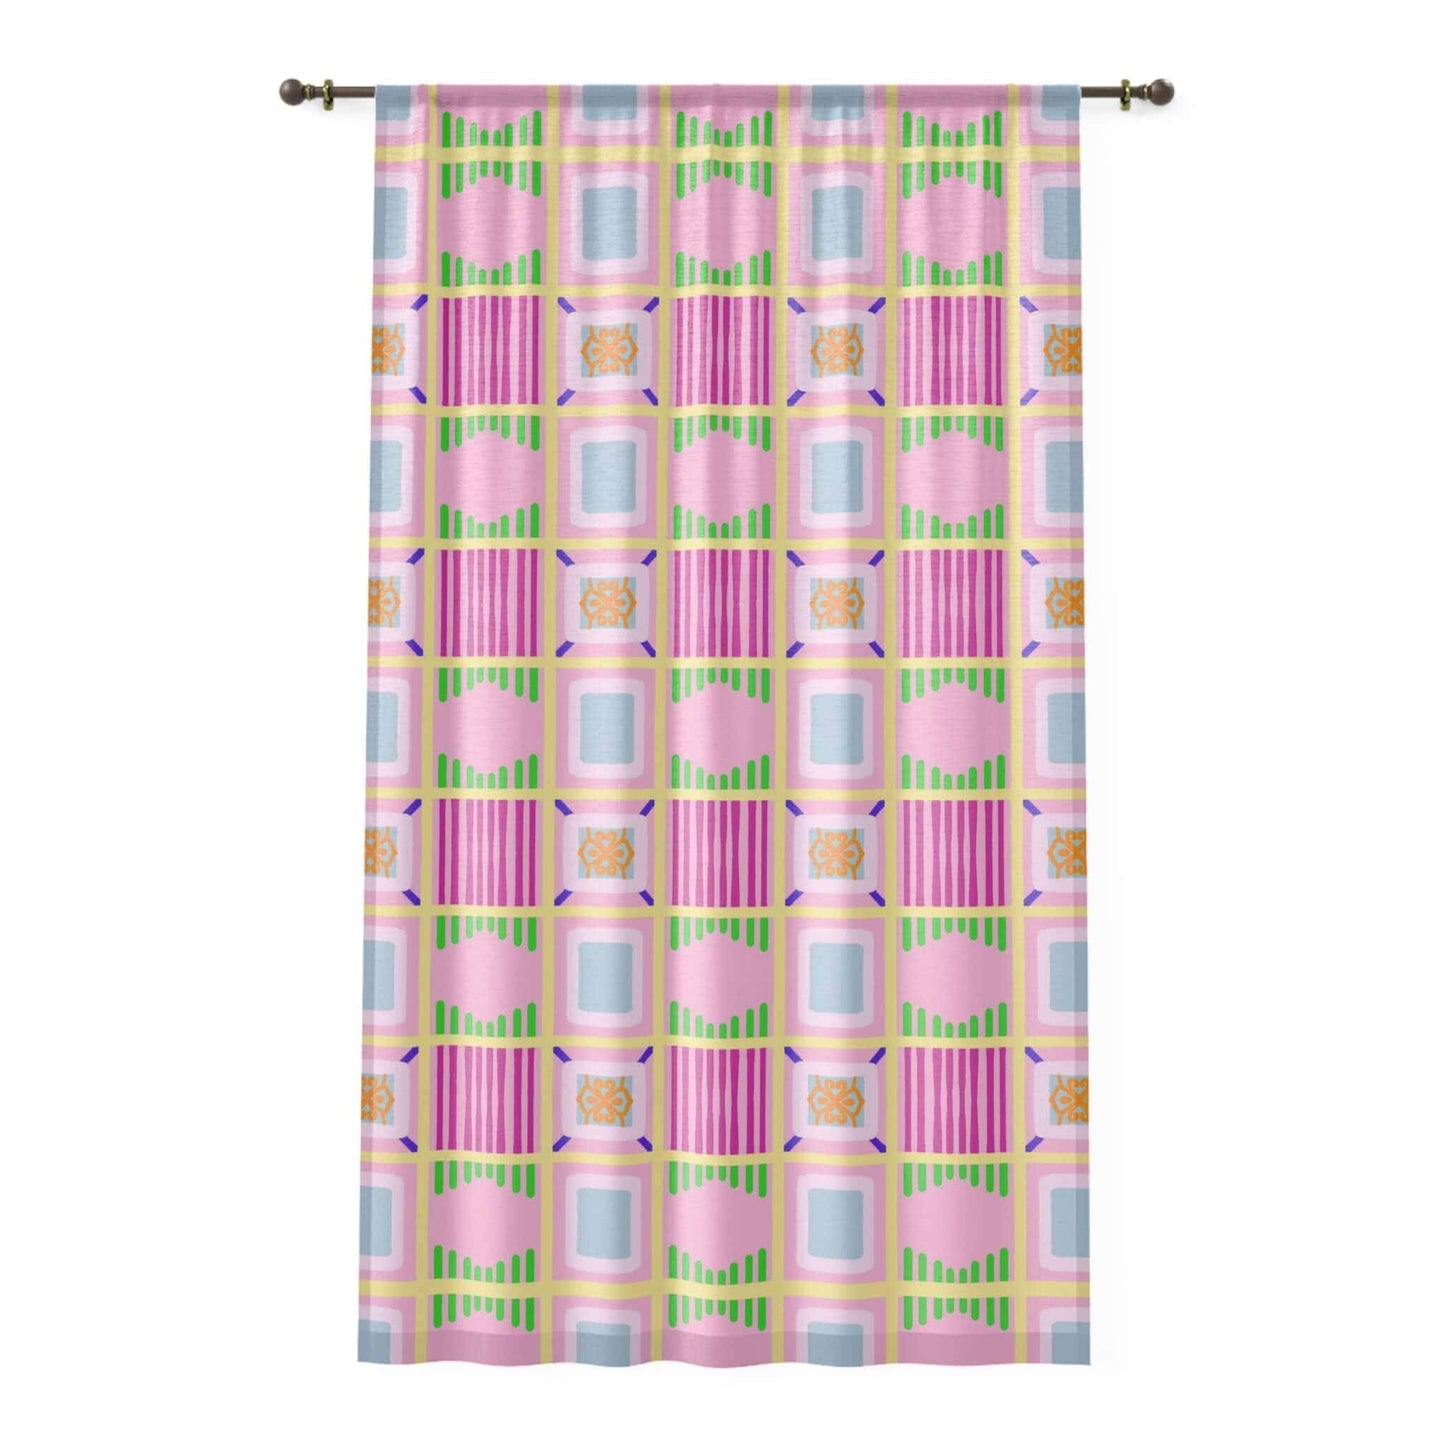 pink sheer curtains | oneowlartist.com